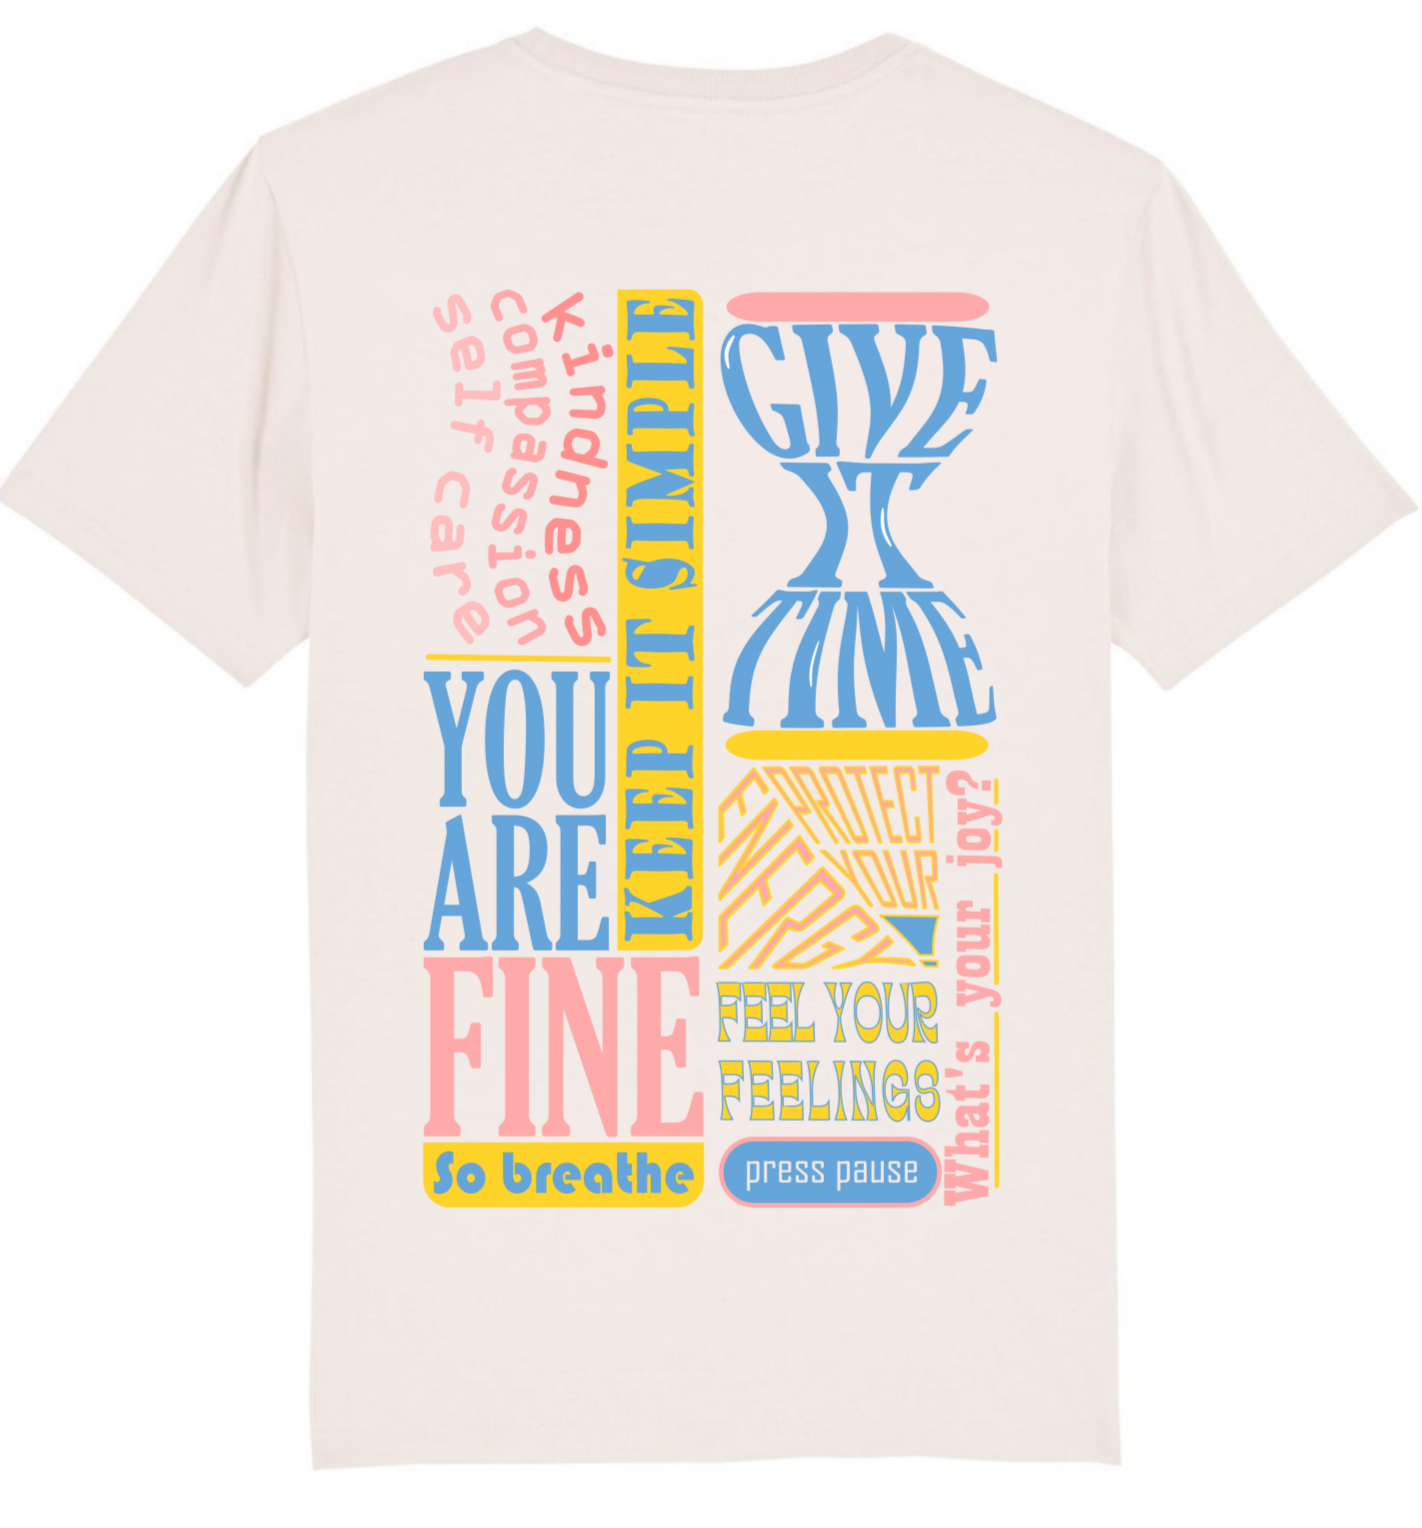 "give it time" Shirt